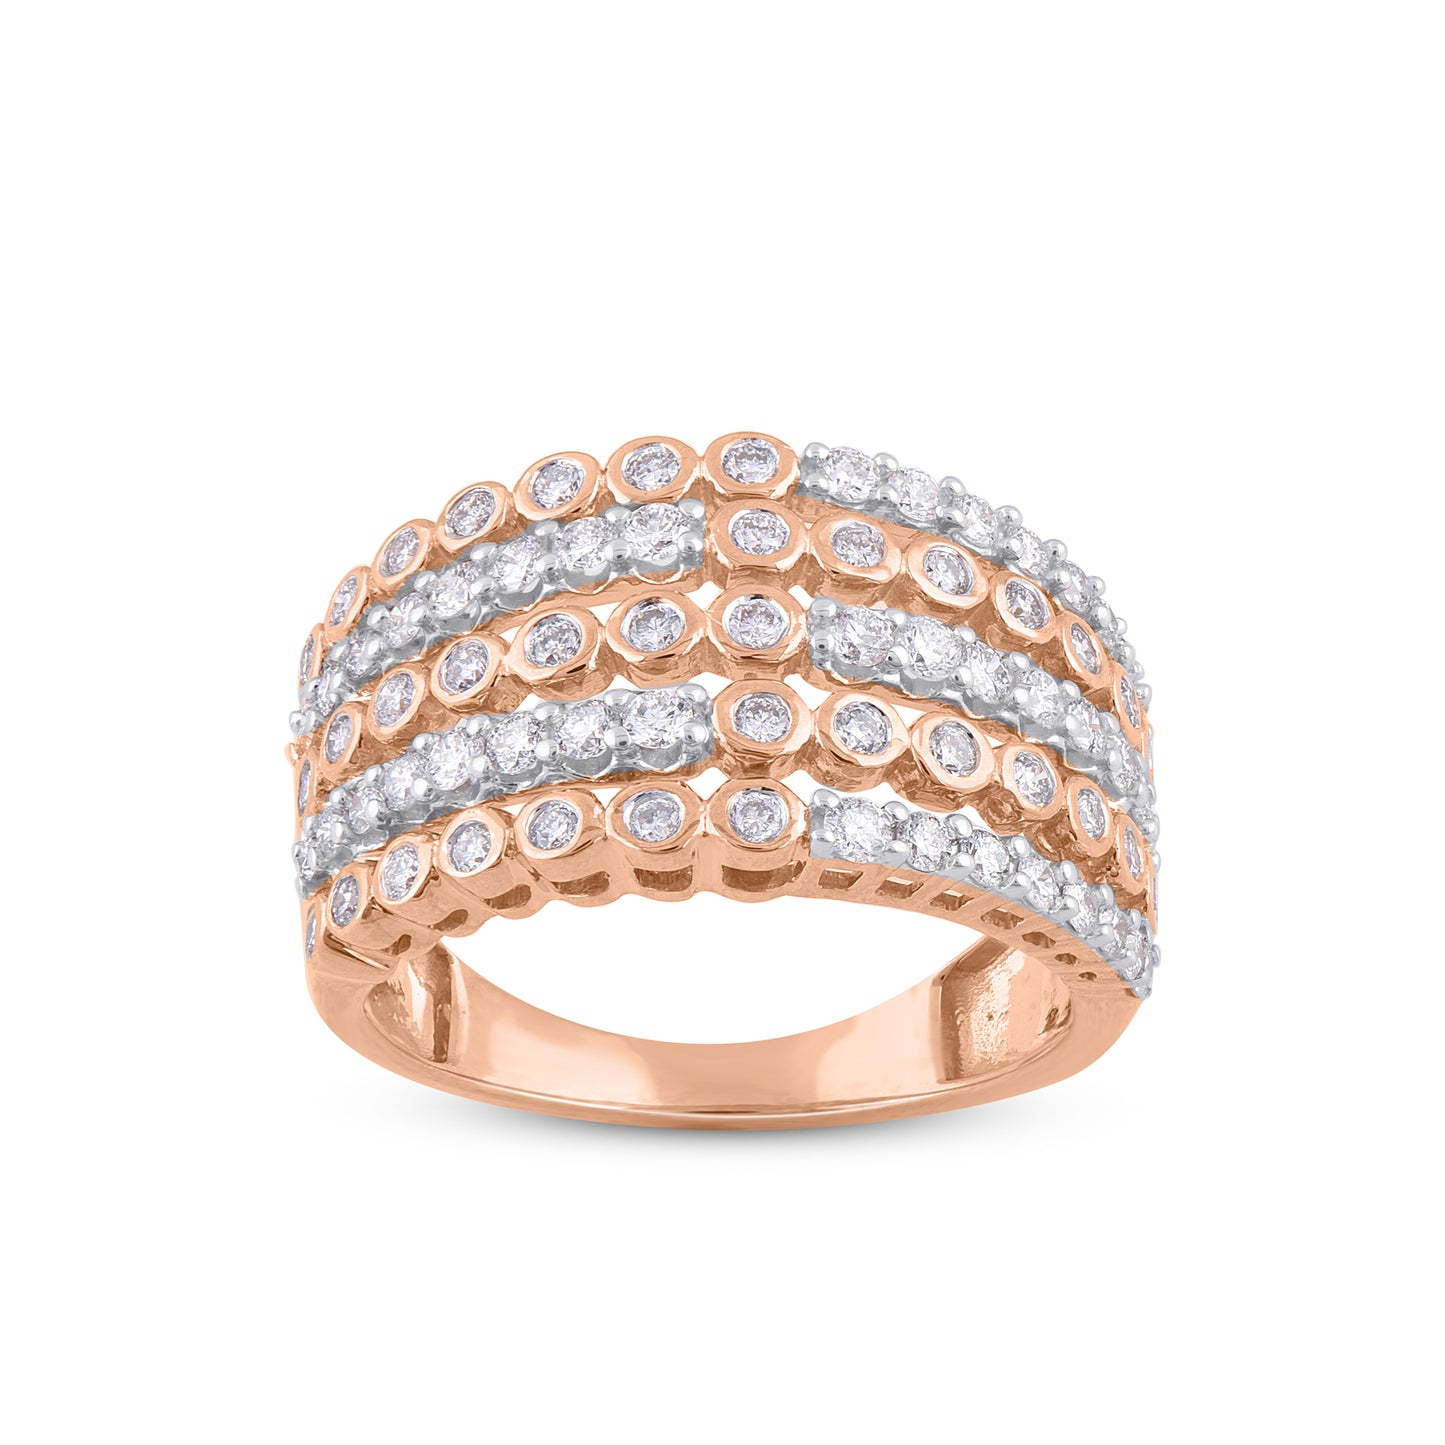 Multi-Row Statement Engagement Band 10K Gold